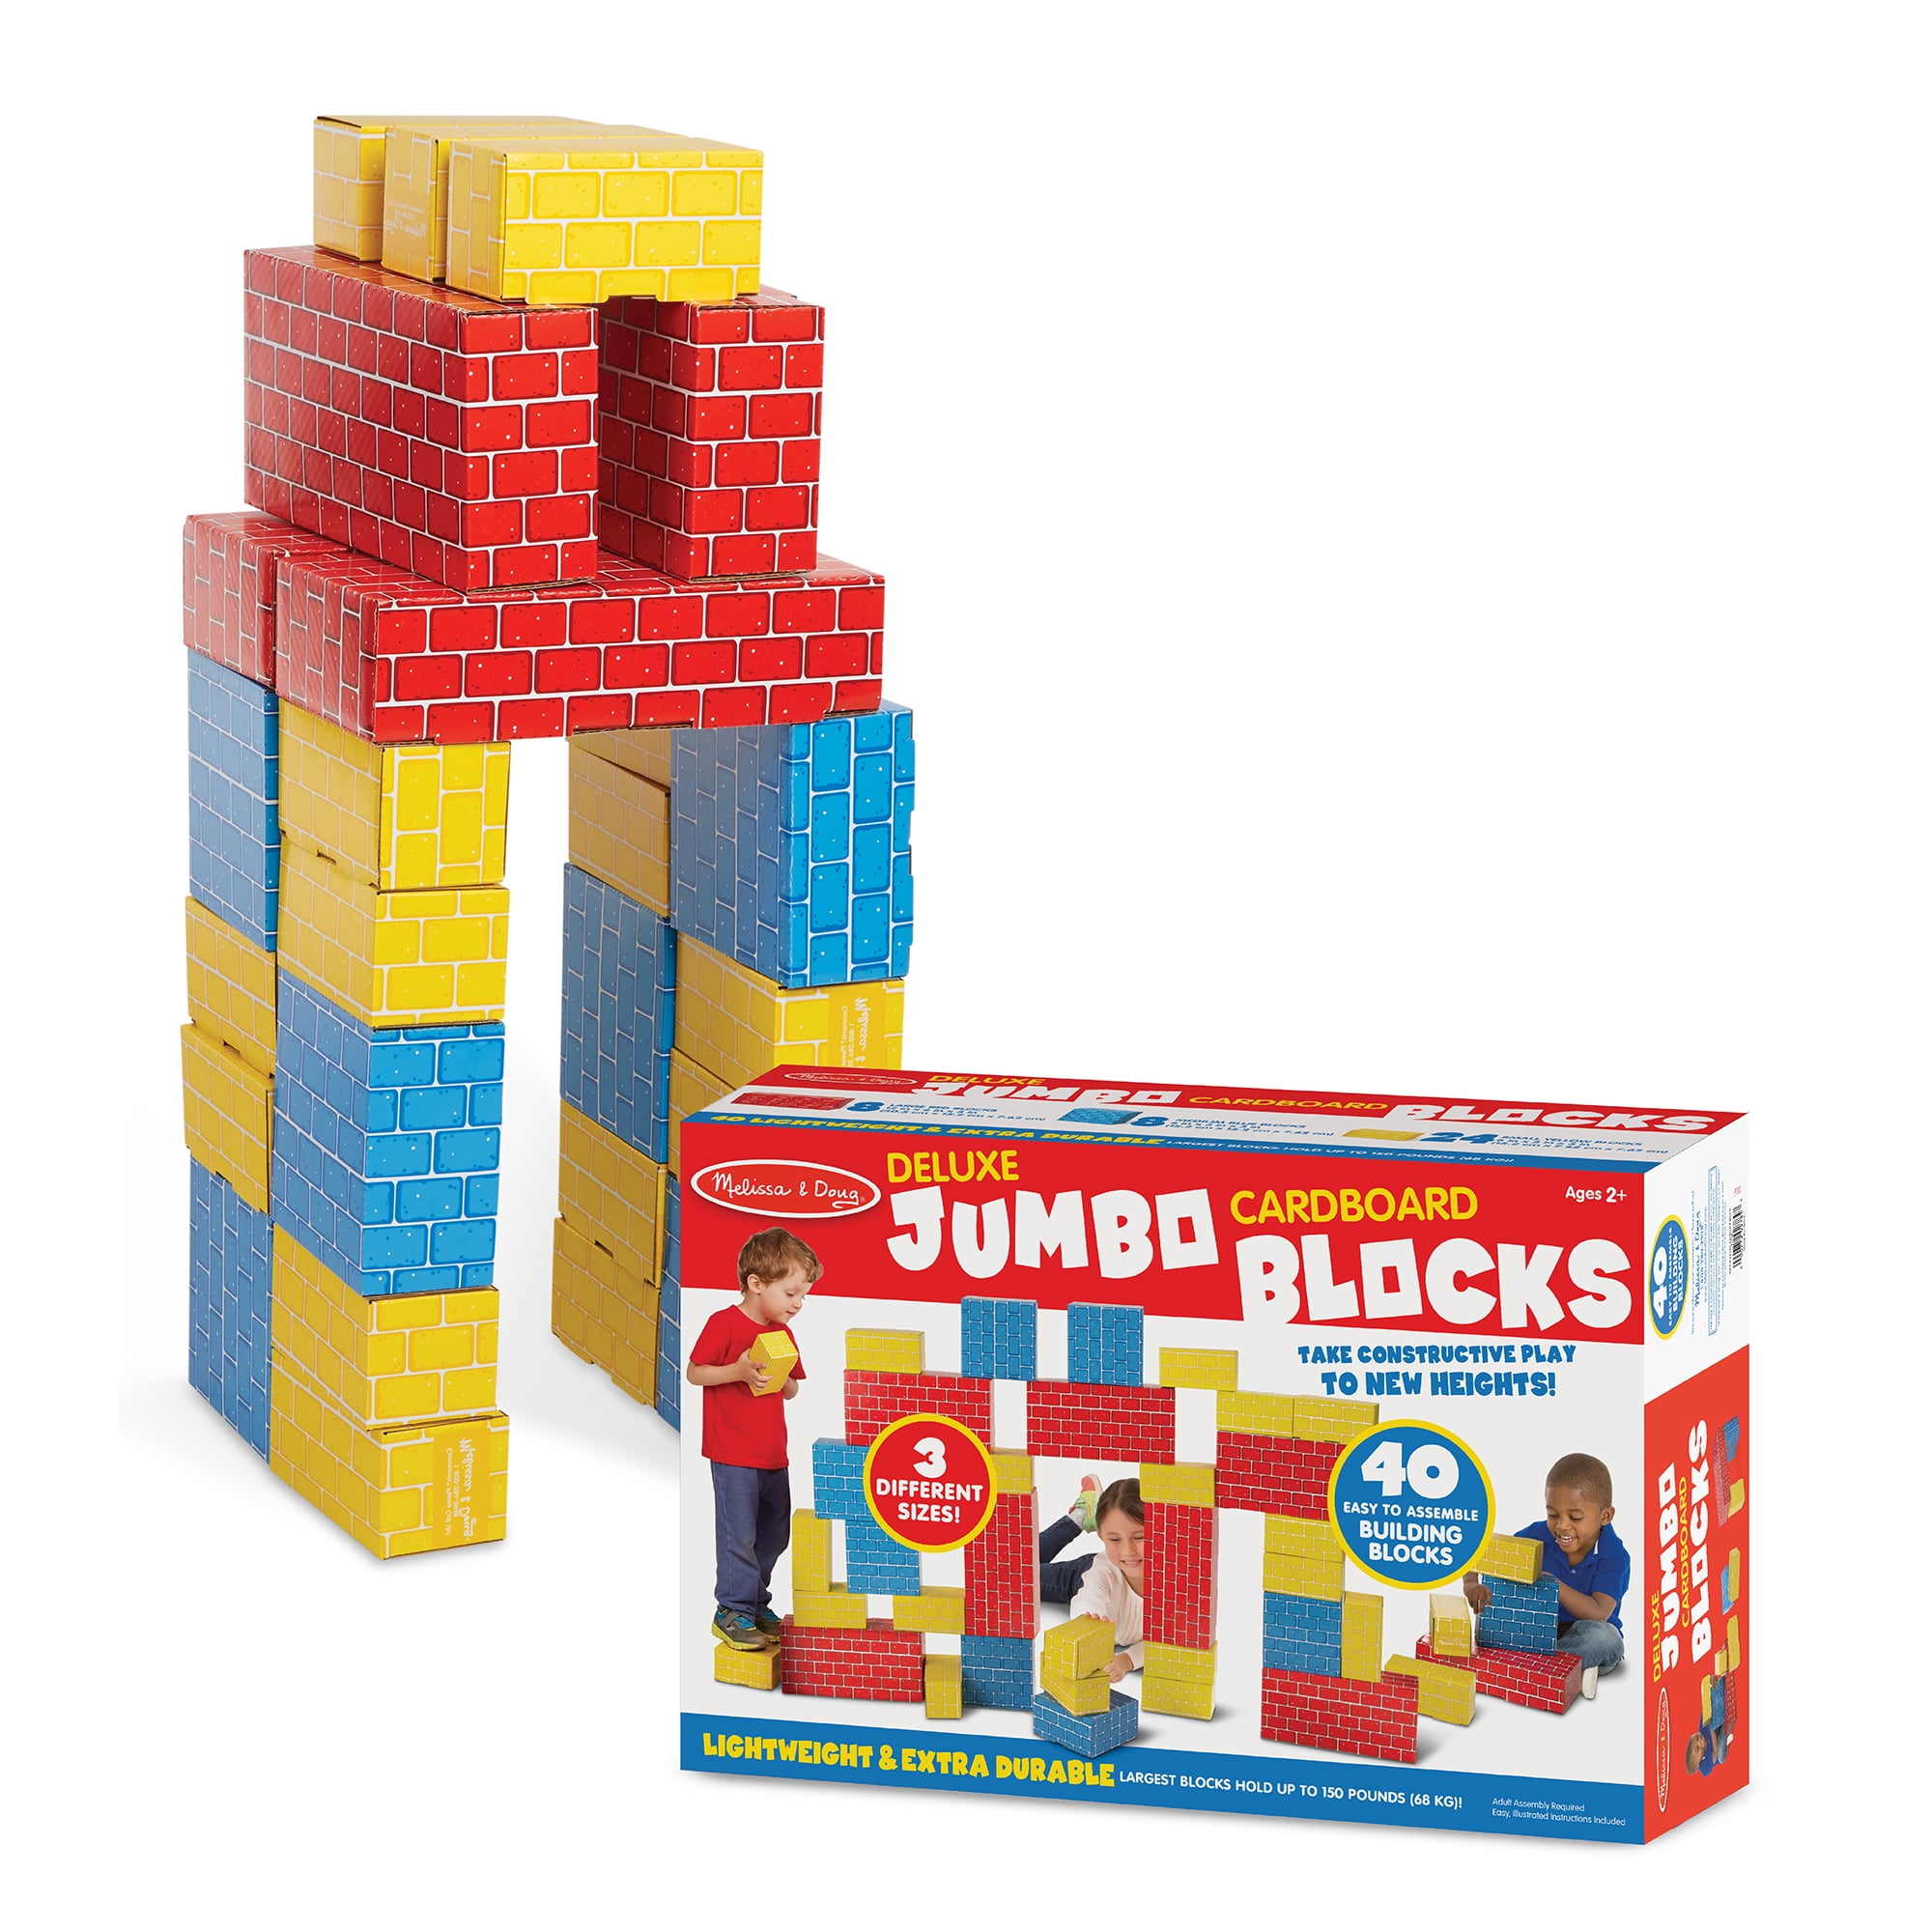 100 Piece Wooden Construction Building Blocks Bricks Urban Toys in a Tub Gift for sale online 